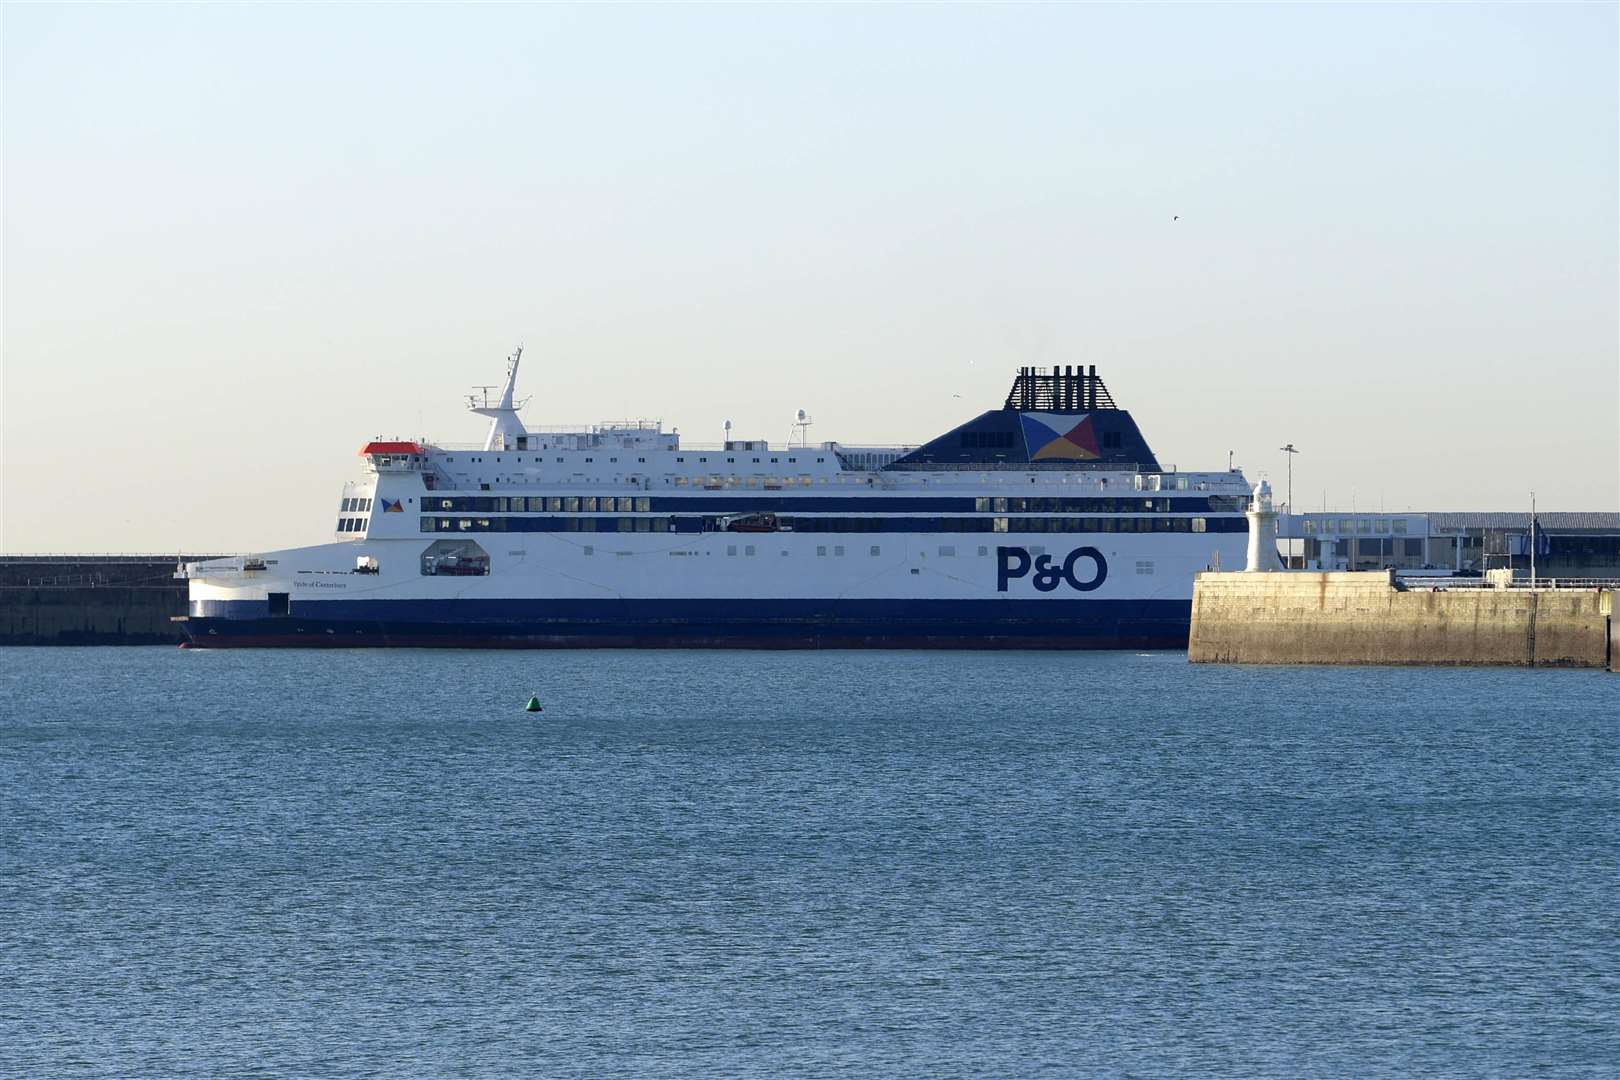 The average hourly pay of the new P&O crew is only £5.50. Picture: Barry Goodwin